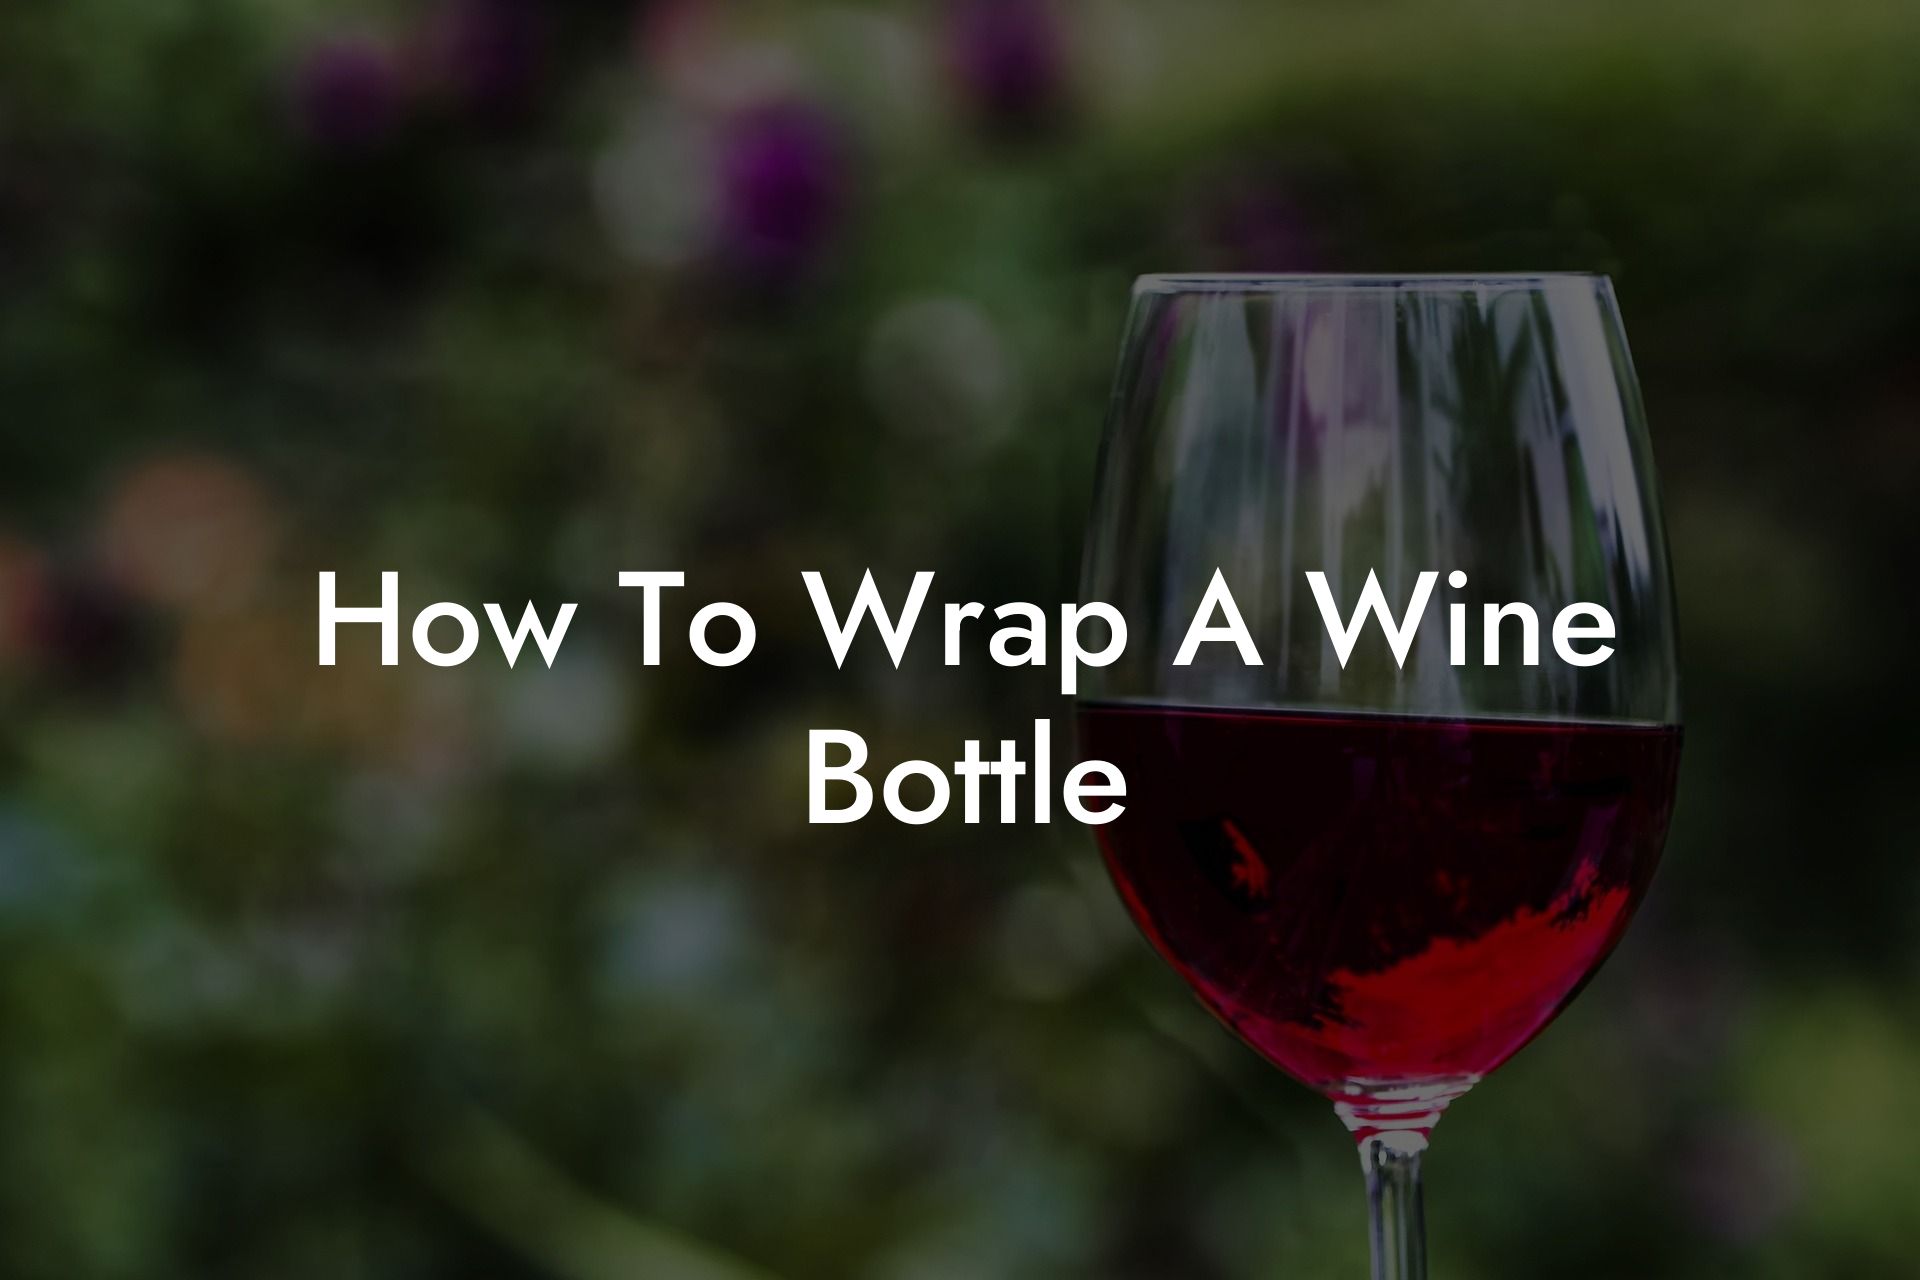 How To Wrap A Wine Bottle